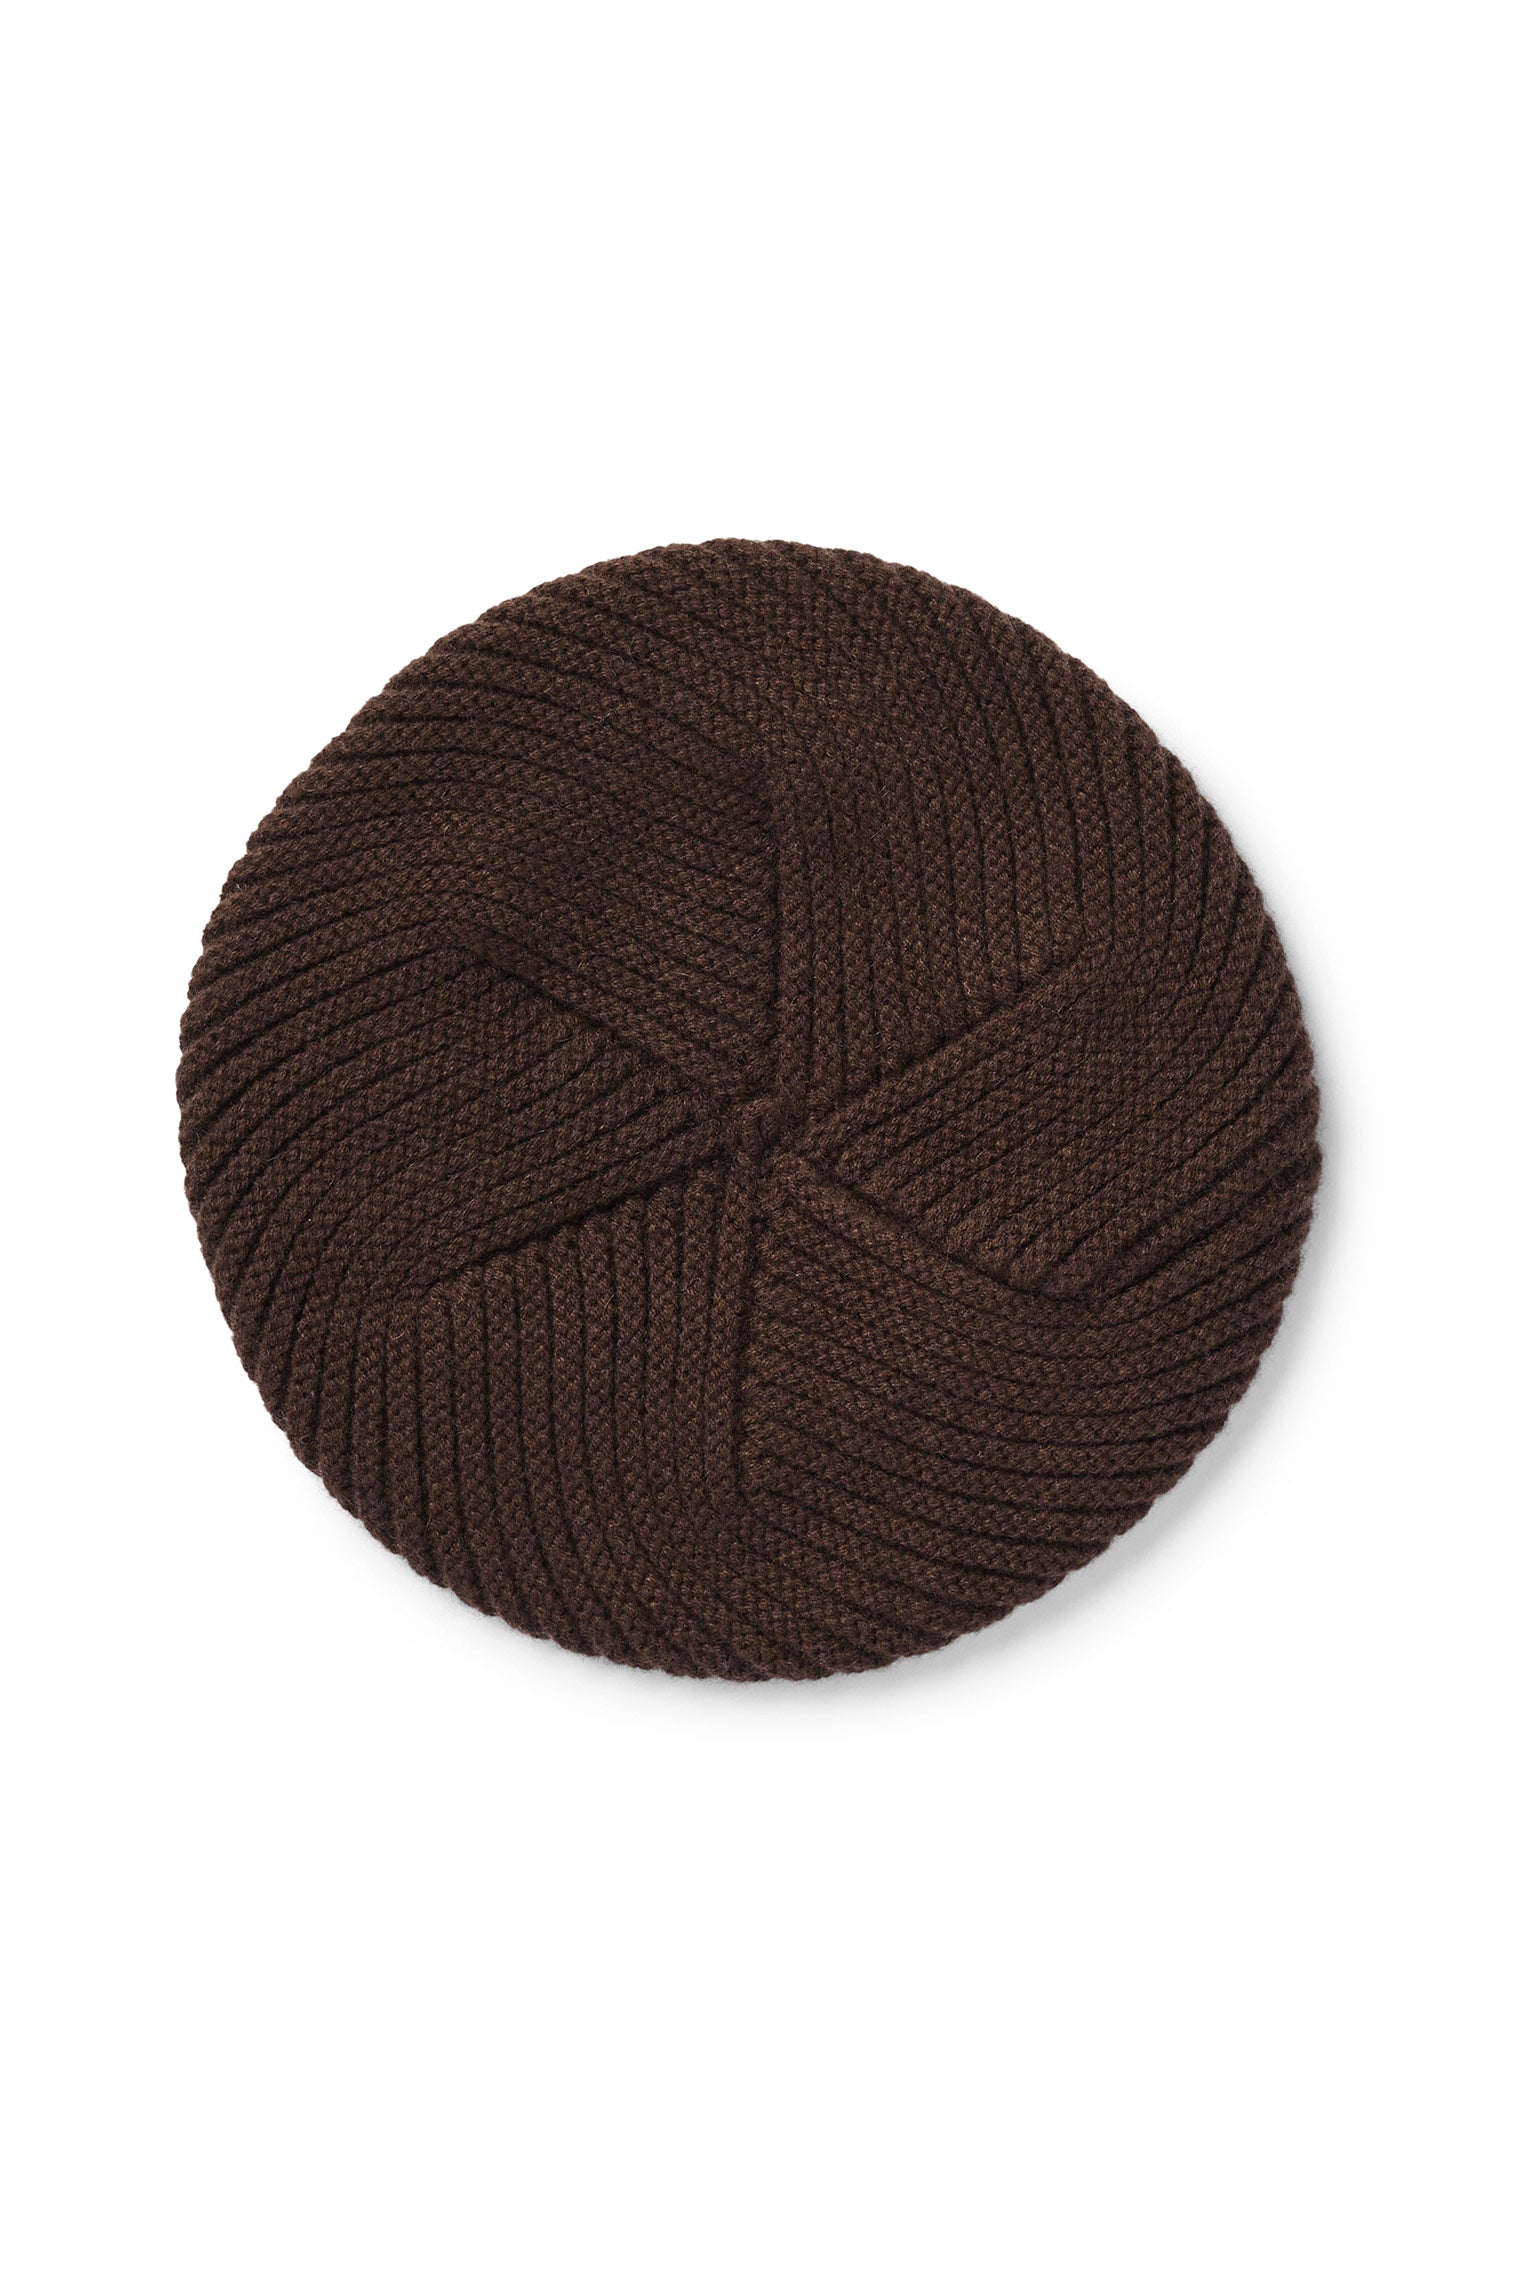 Brown Knitted Cashmere Beret - Products - Lock & Co. Hatters London UK